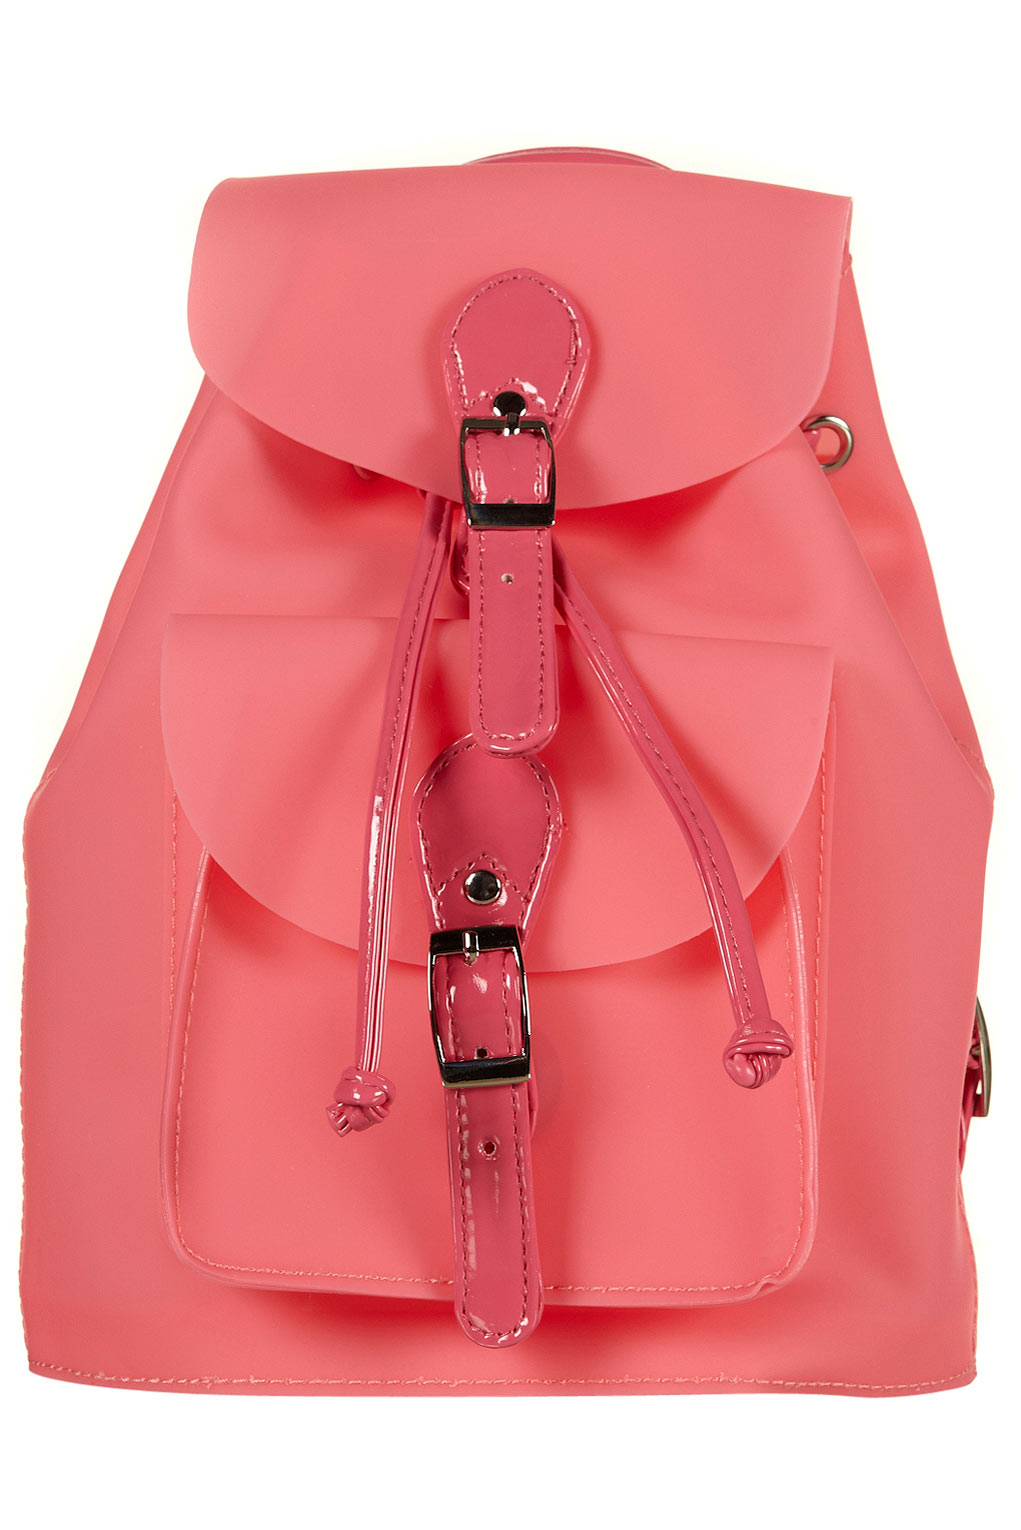 TOPSHOP Frost Plastic Backpack in Pink - Lyst